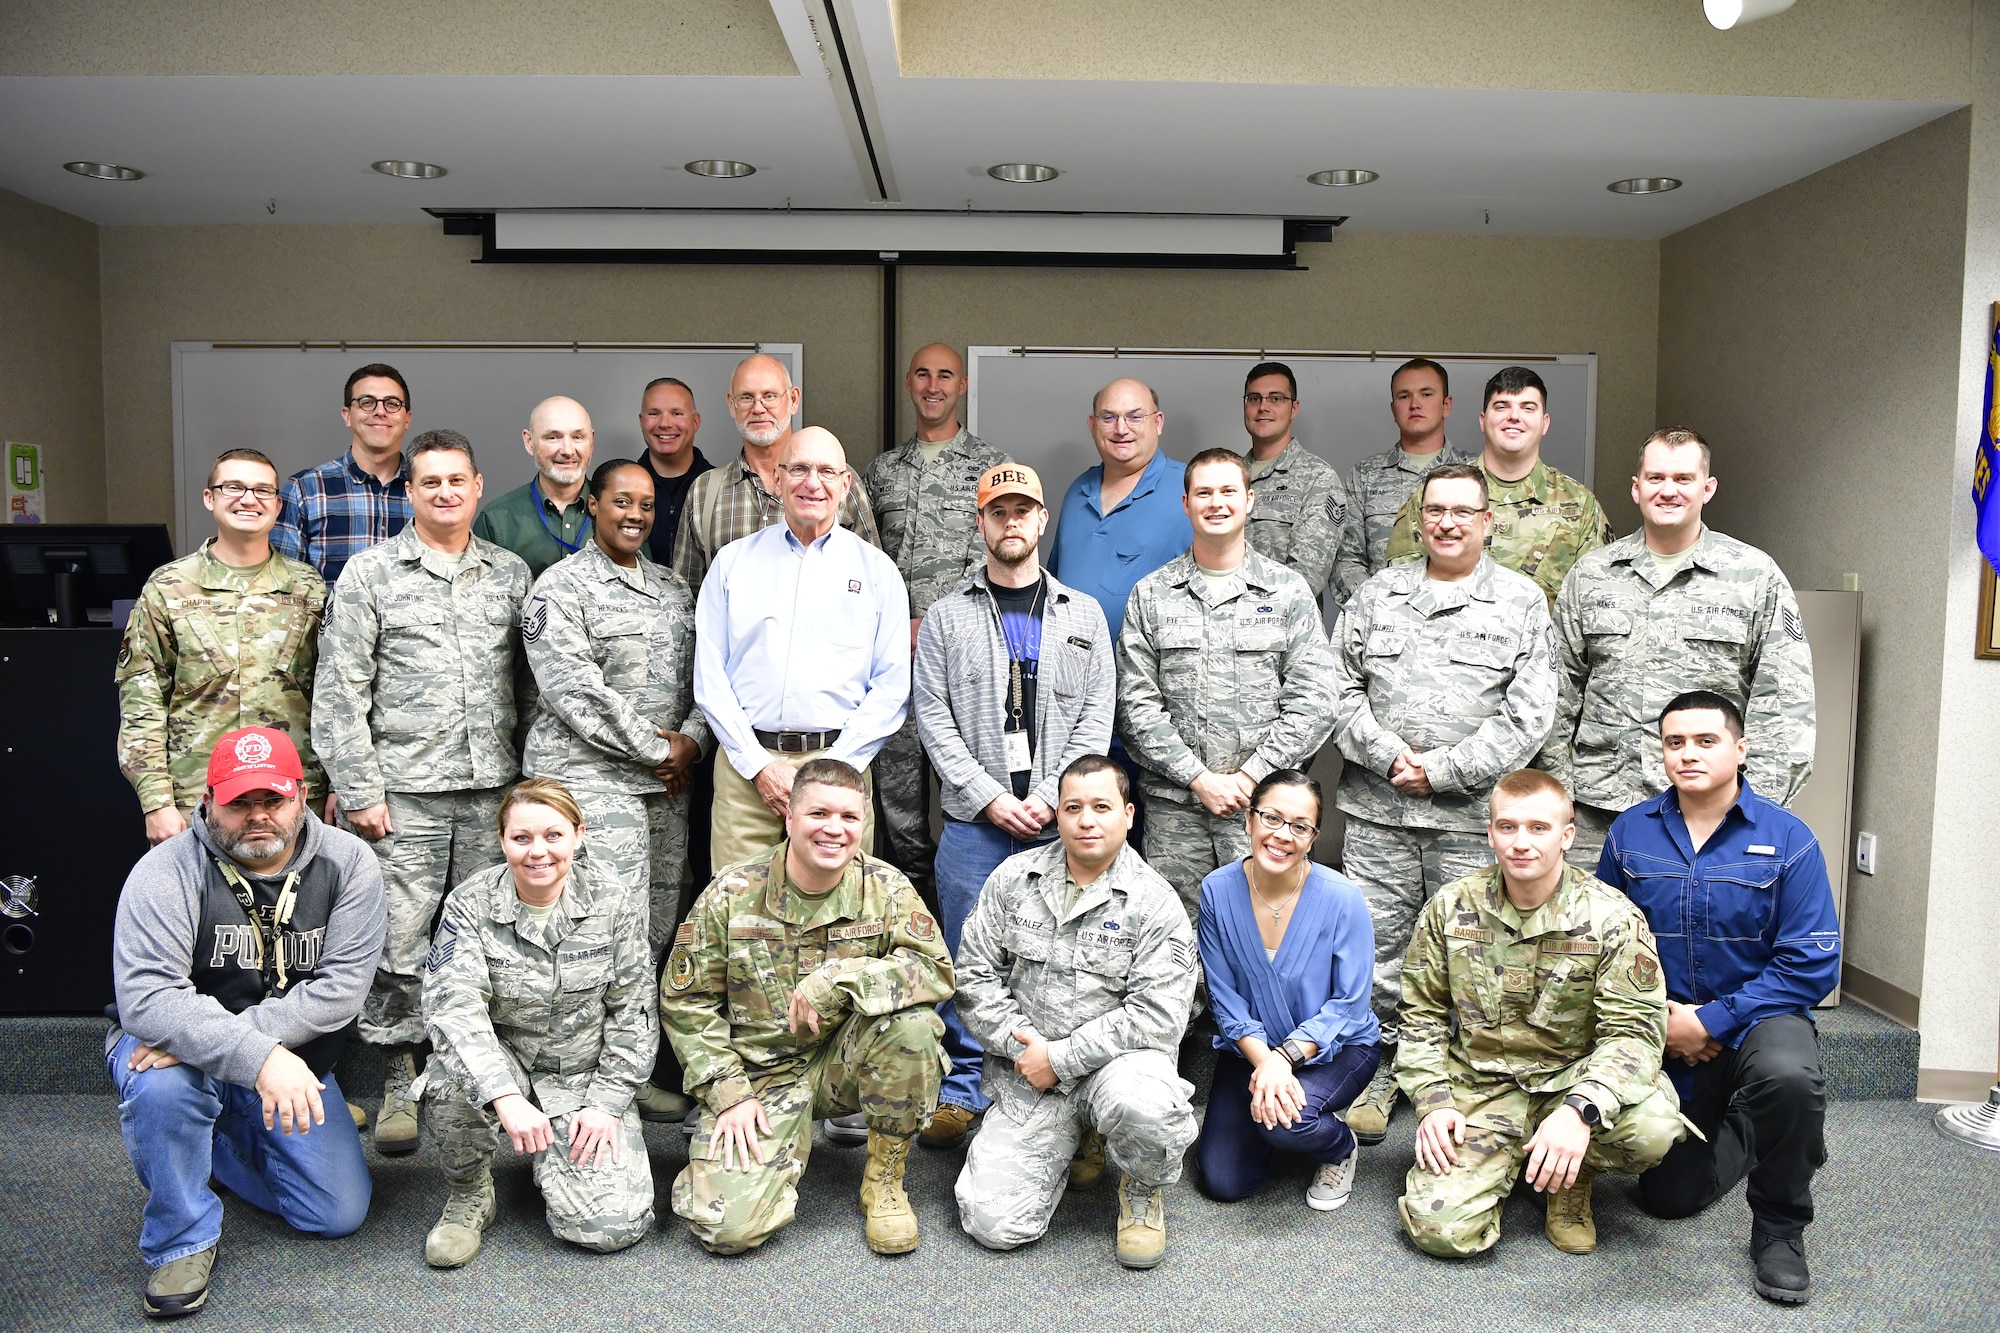 Personnel from the 434th Air Refueling Wing pose for a photo during a life safety code essential course at Grissom Air Reserve Base, Indiana, Nov. 7, 2019. The course, developed and taught by the National Fire Protection Association was designed to teach life safety code strategies. (U.S. Air Force photo/Master Sgt. Ben Mota)